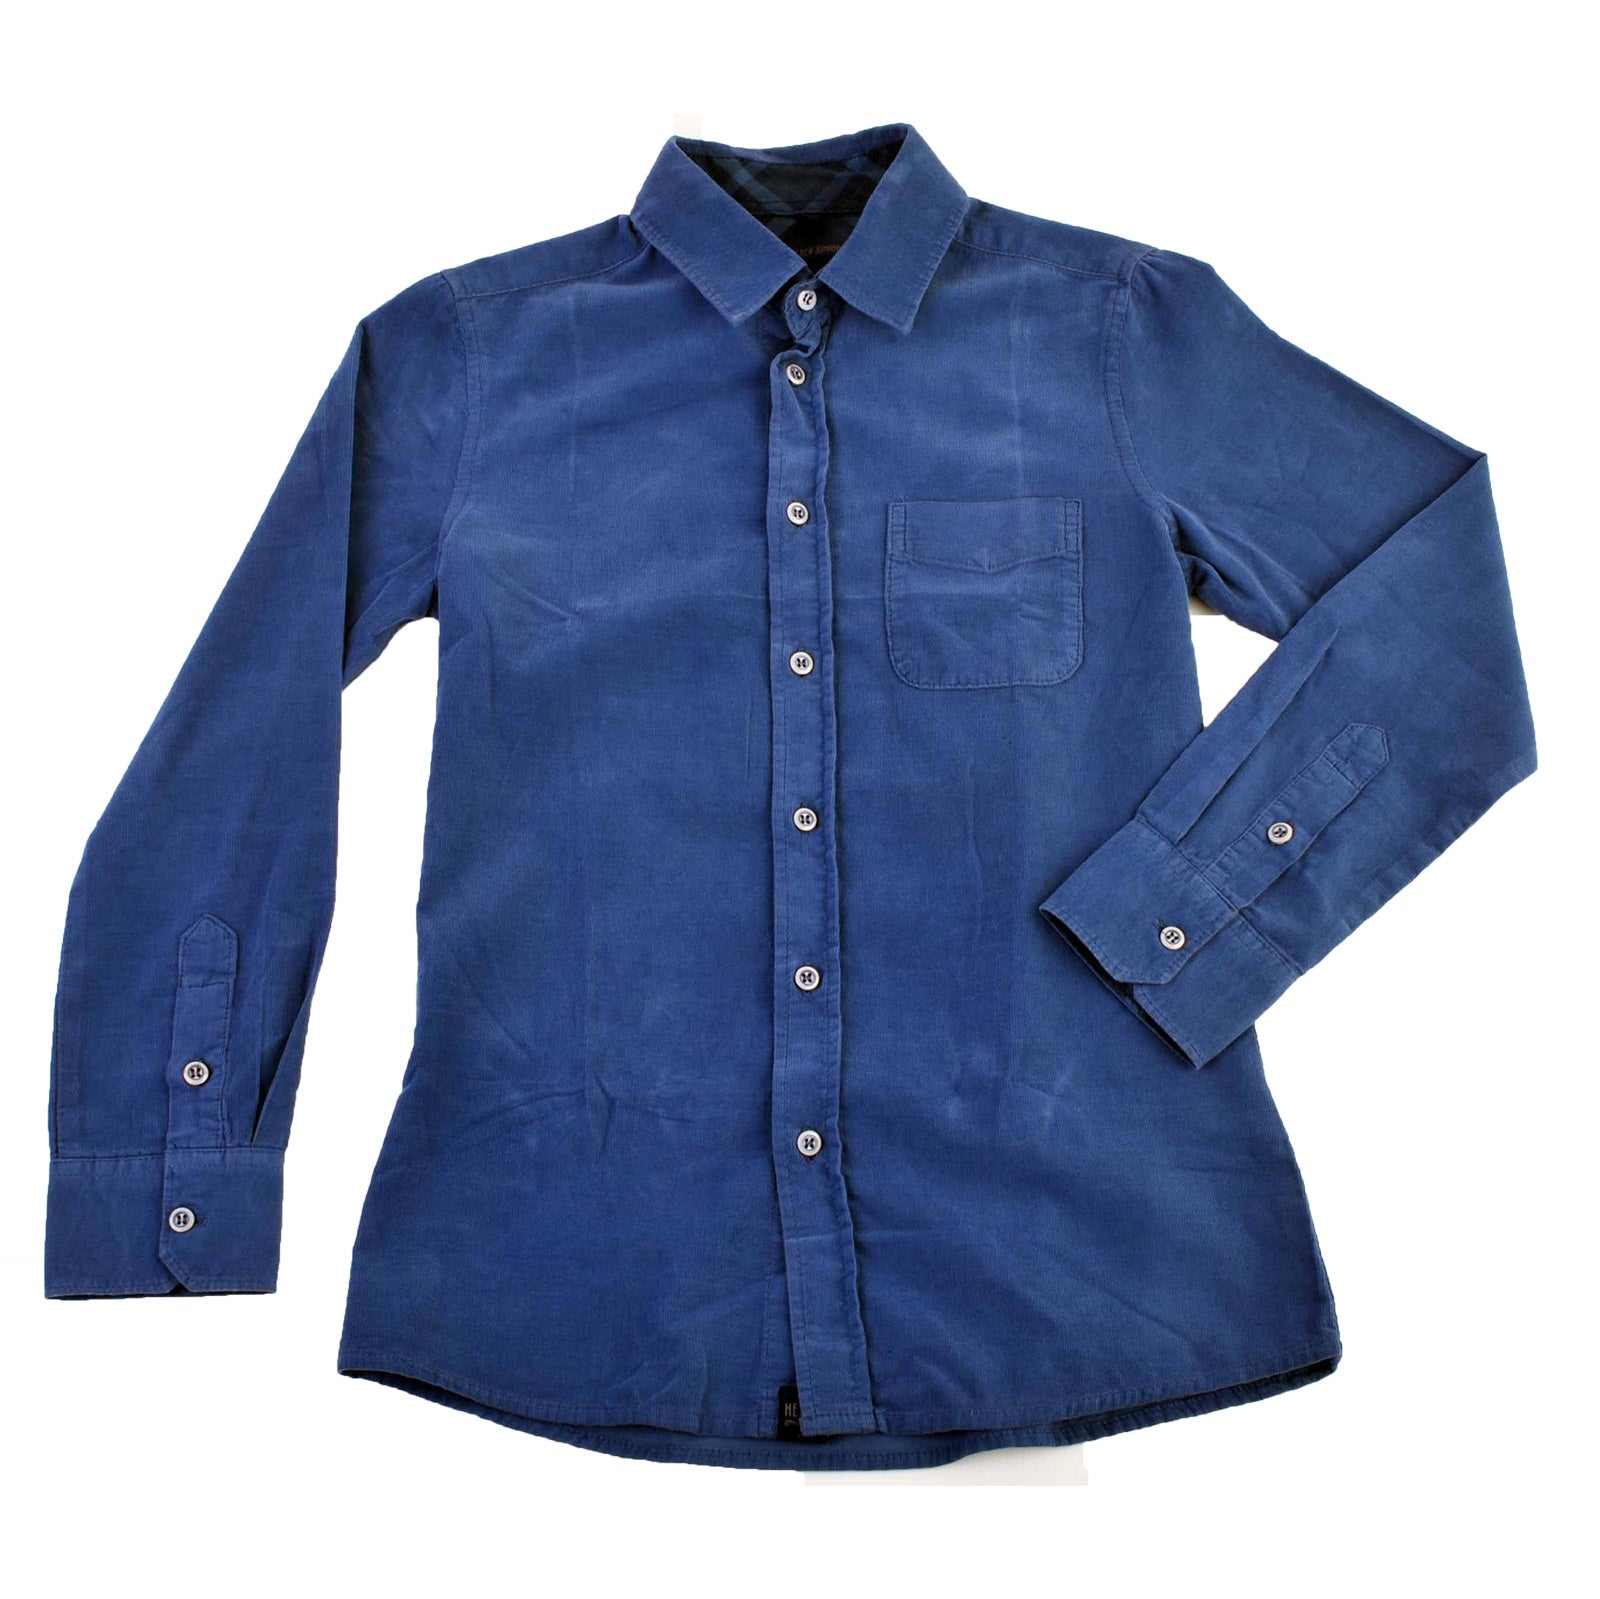 
  Shirt from the Silvian Heach Kids children's clothing line in striped velvet with a worn-out c...